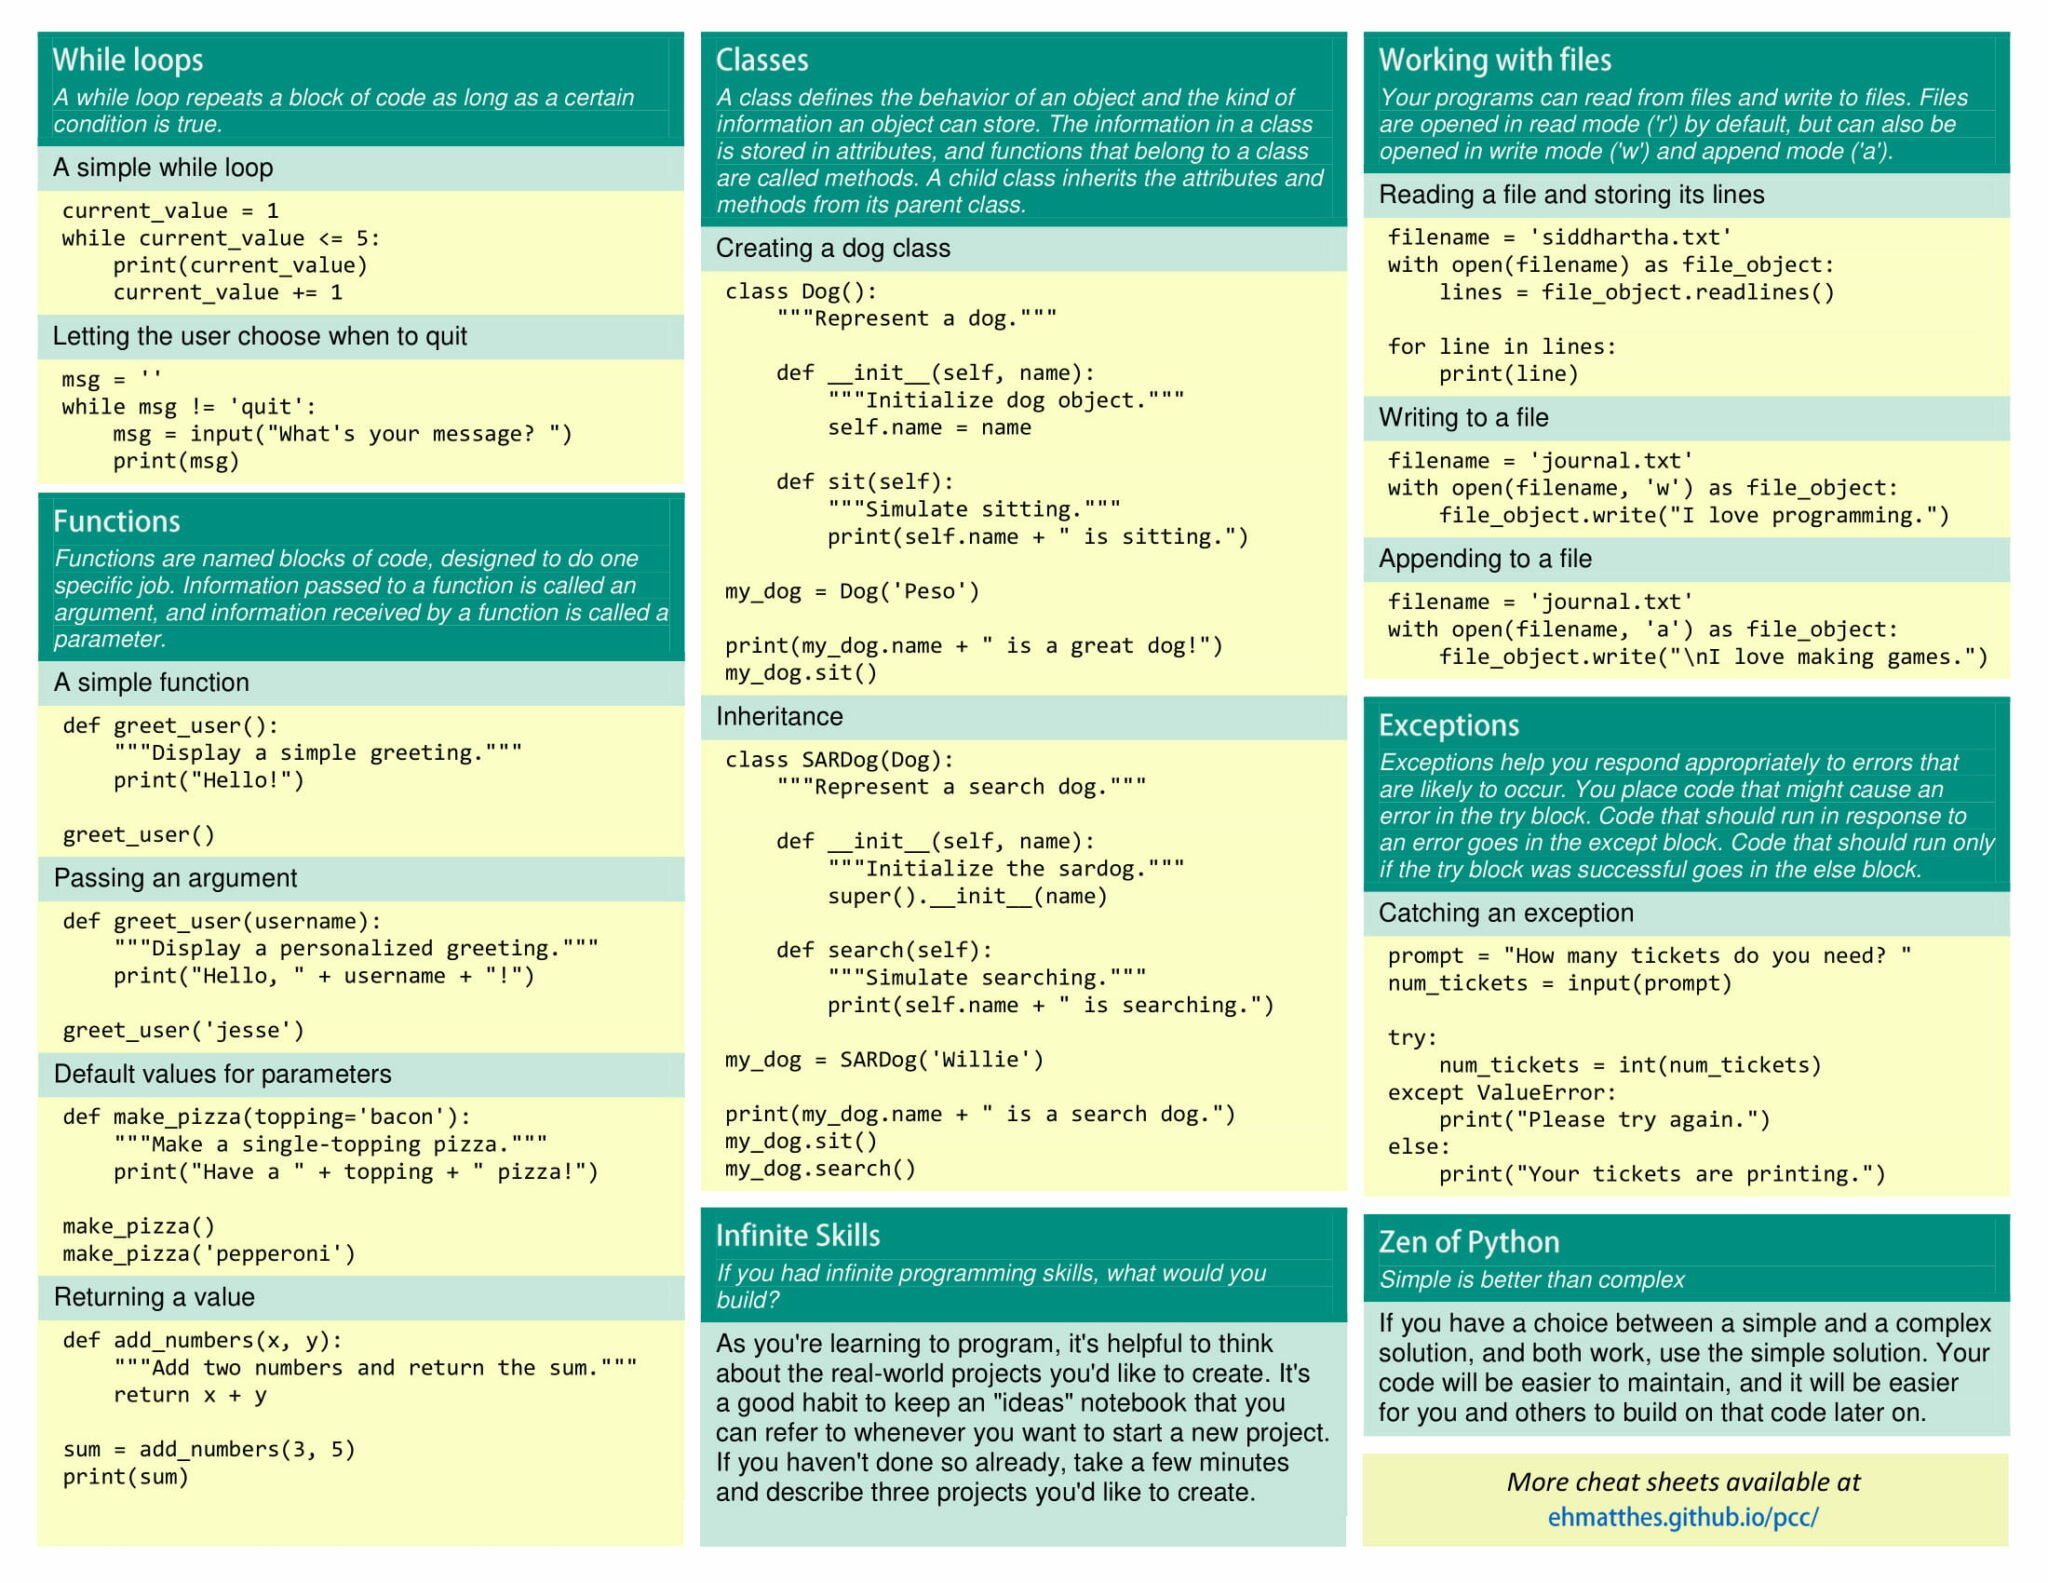 Python Cheat Sheet For Hackers And Developers Testing - Riset